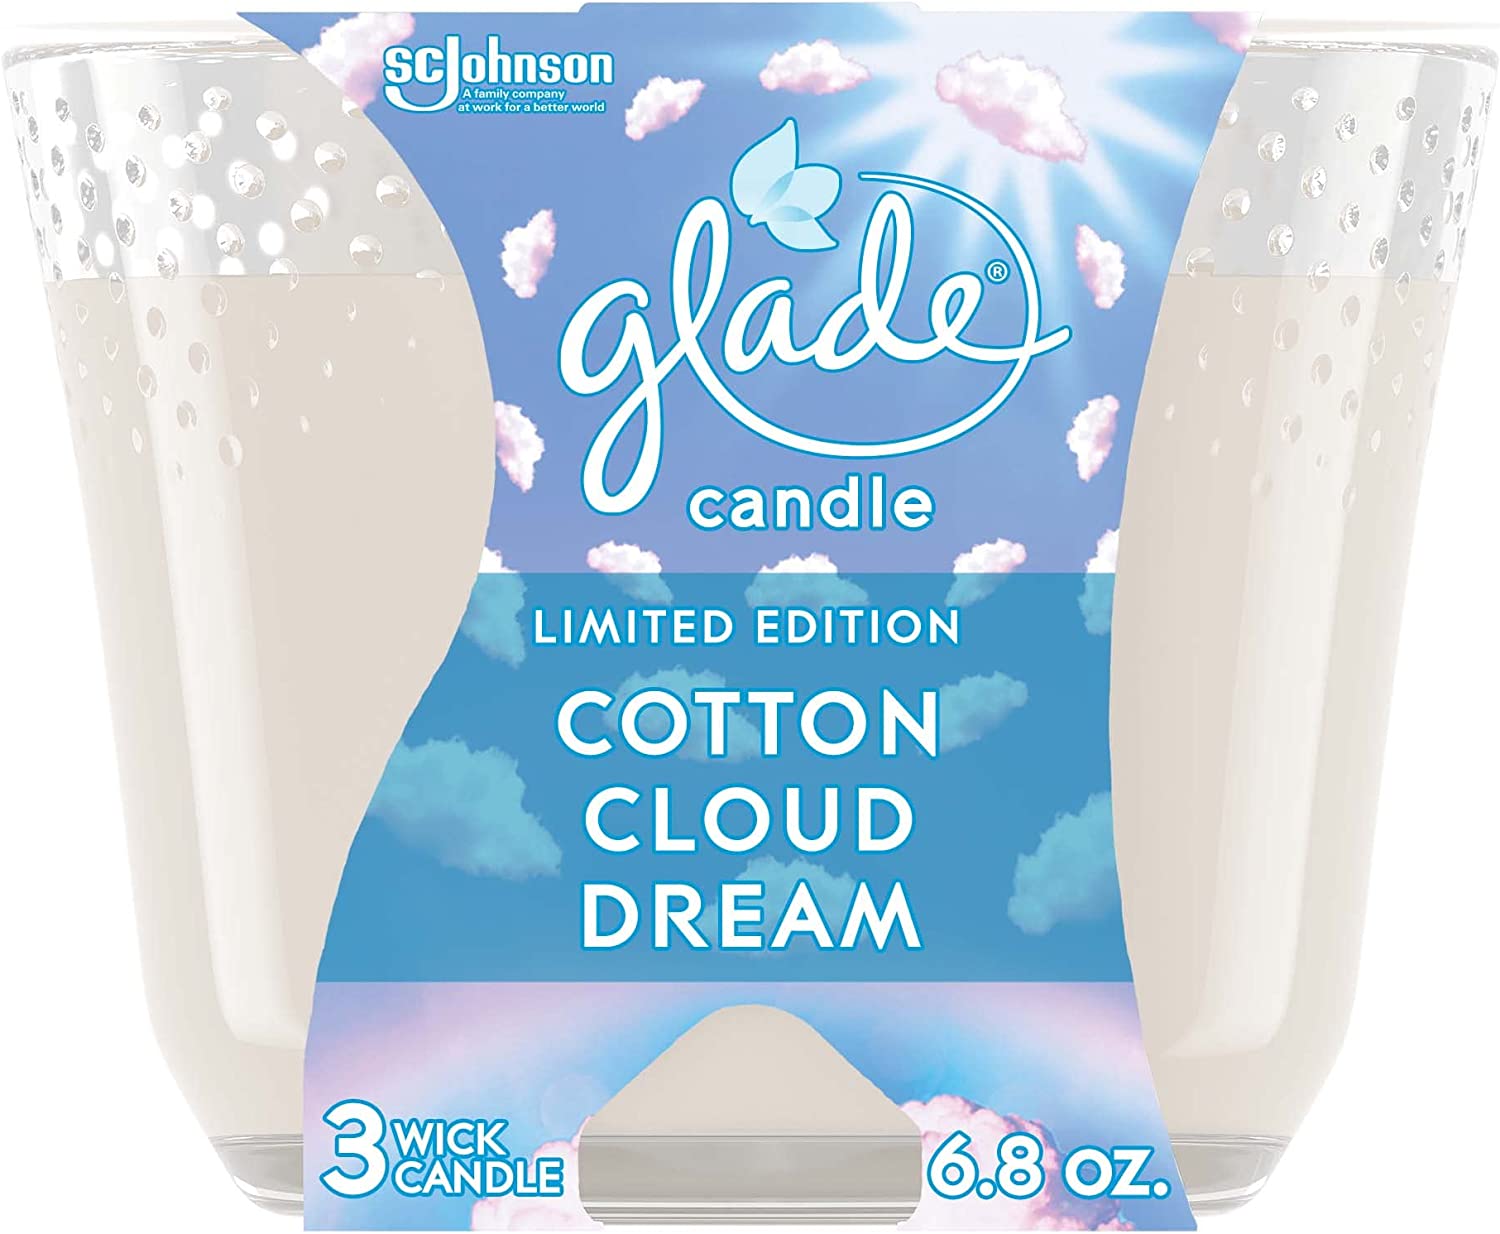 Glade Candle Cotton Cloud Dream, Fragrance Candle Infused with Essential Oils, Air Freshener Candle, 3-Wick Candle, 6.8 Oz, 3 Count